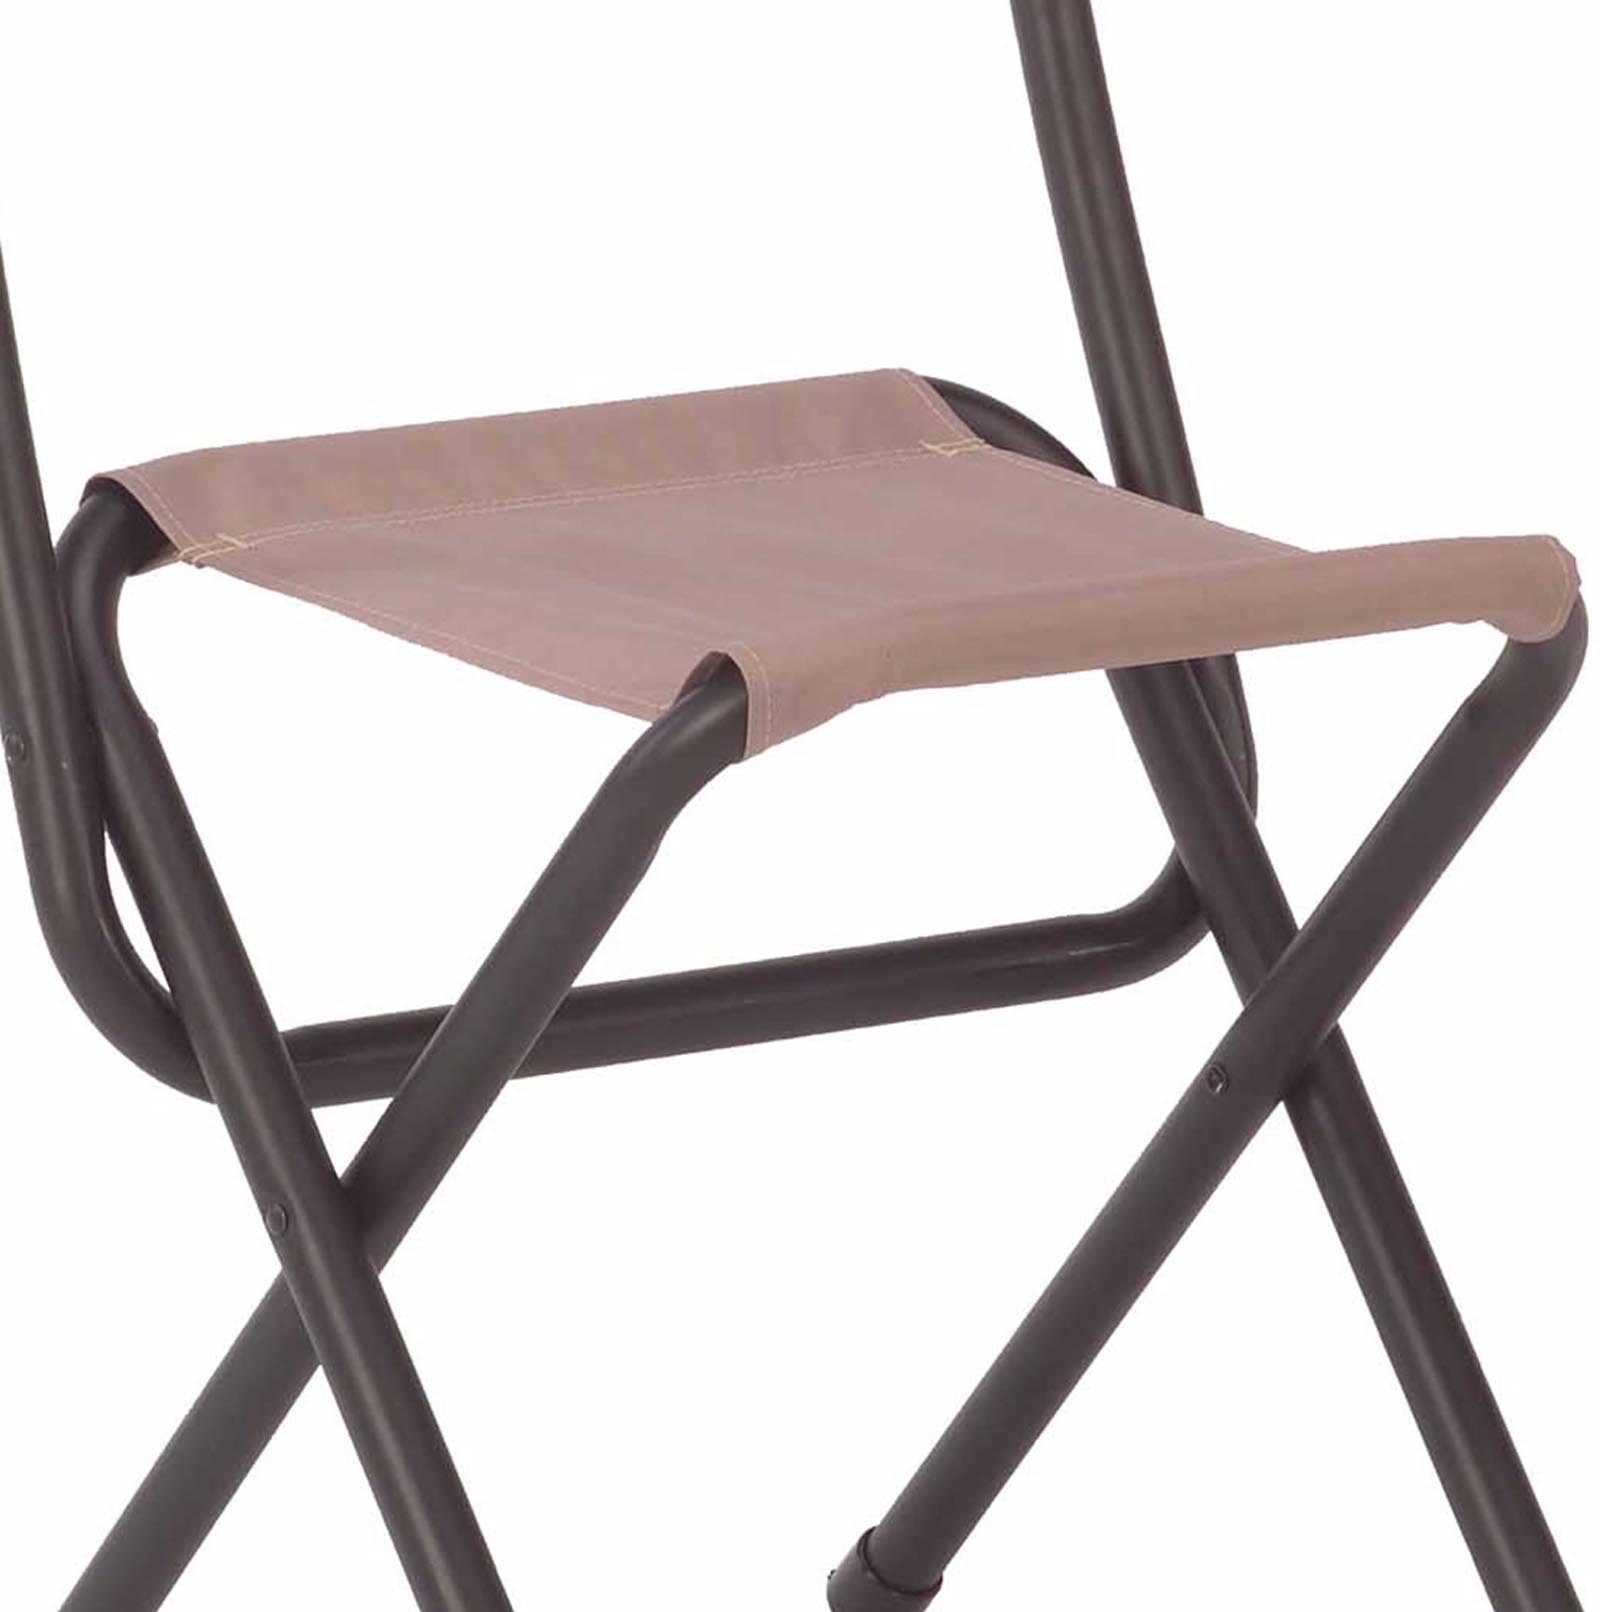 Coleman Woodsman II Adult Camping Chair, Beige - image 3 of 6